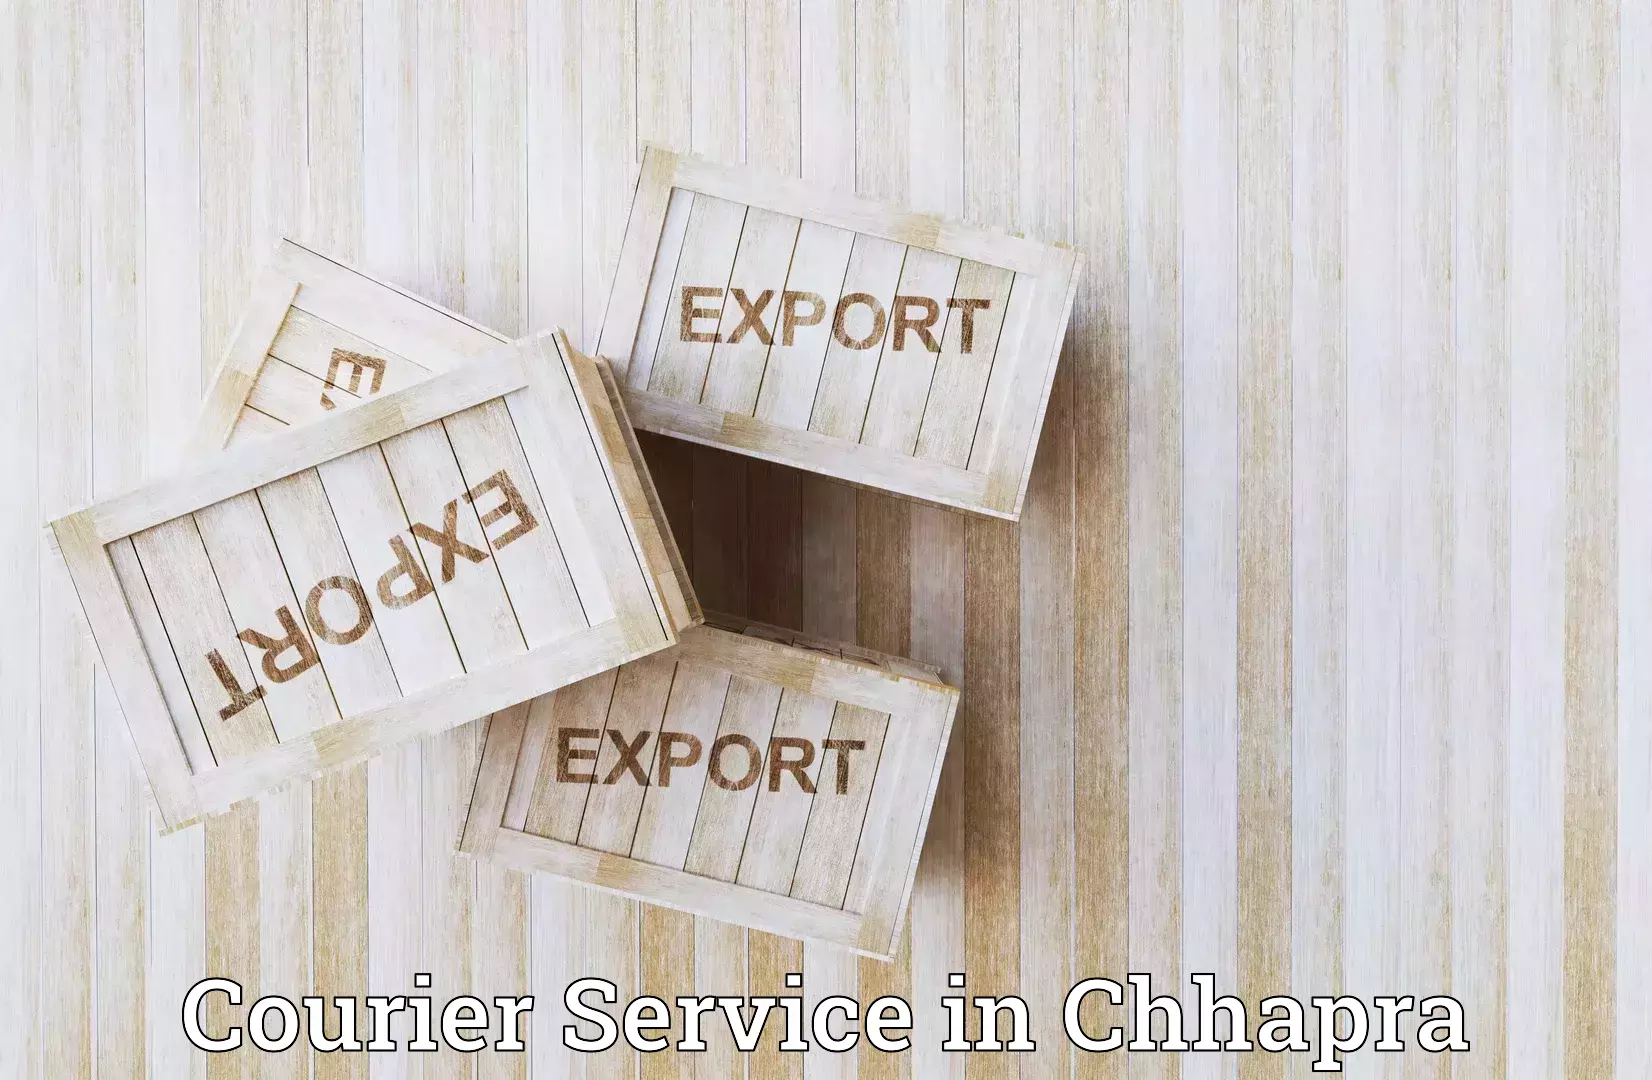 Multi-service courier options in Chhapra